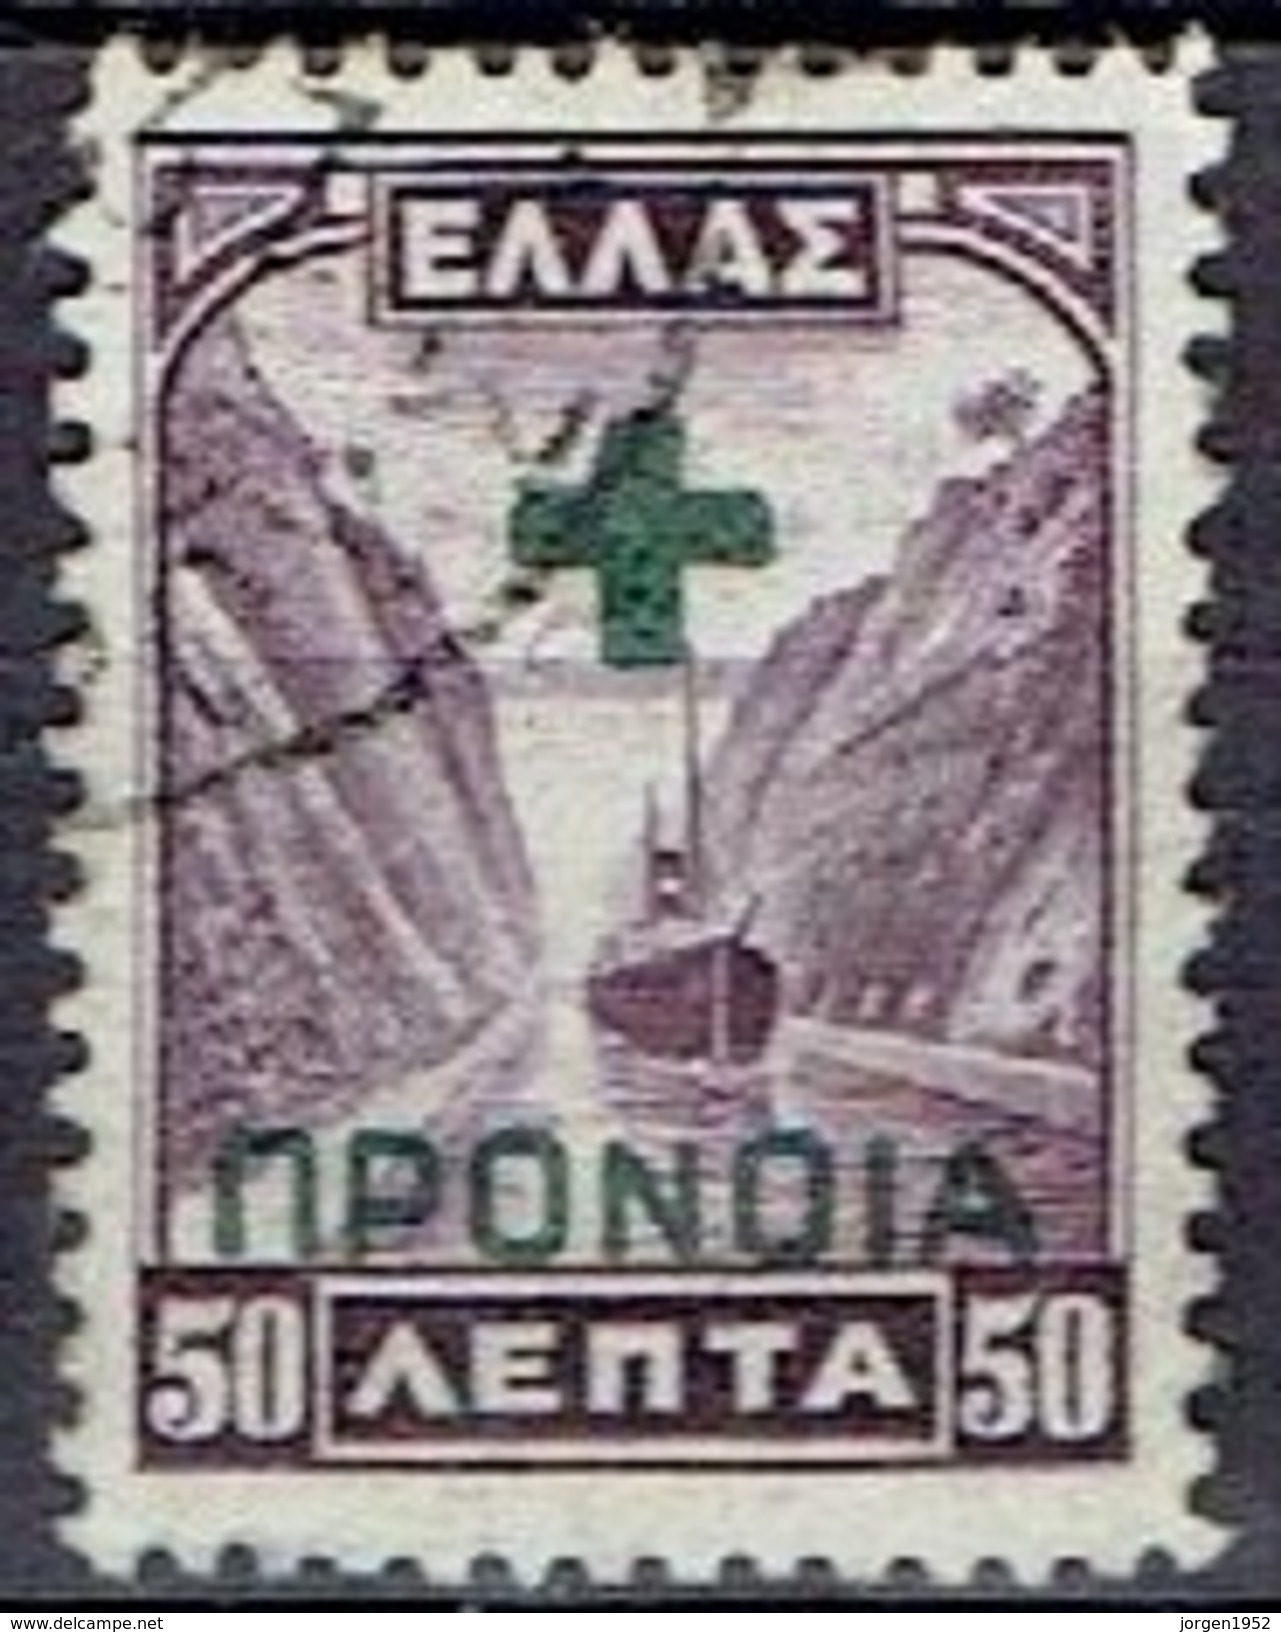 GREECE  # SOCIAL WELFARE STAMPS FROM 1938 - National Resistance